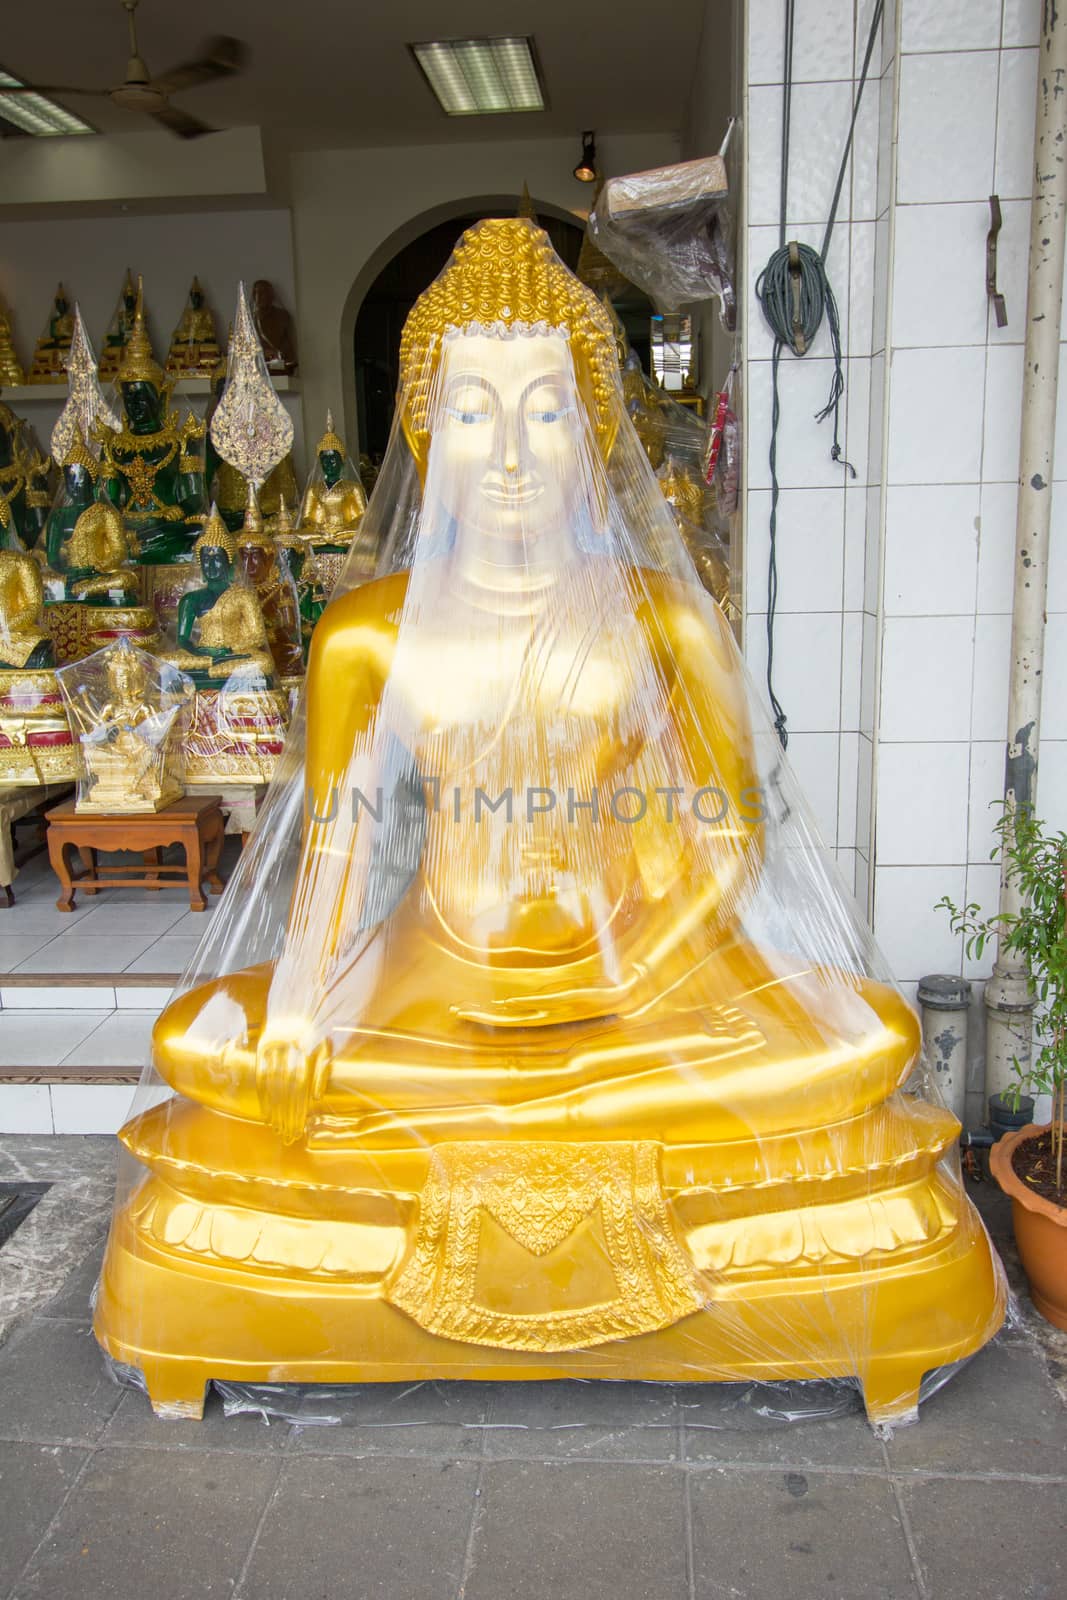 buddha wrapped in plastic for sale in front of the shop